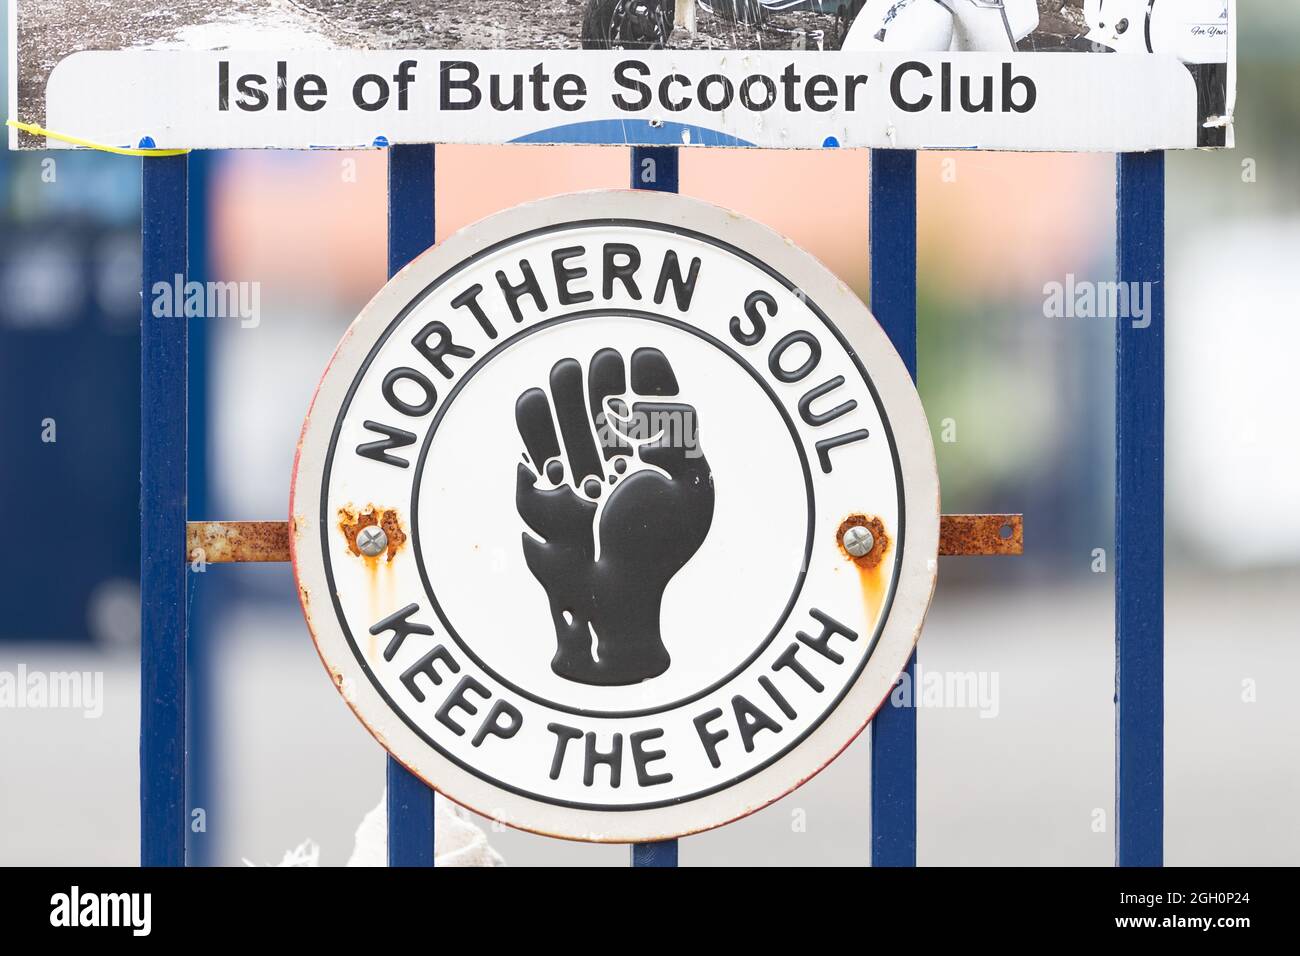 Northern Soul Keep the Faith sign and logo, Rothesay, Isle of Bute, Argyll and Bute, Escocia, REINO UNIDO Foto de stock